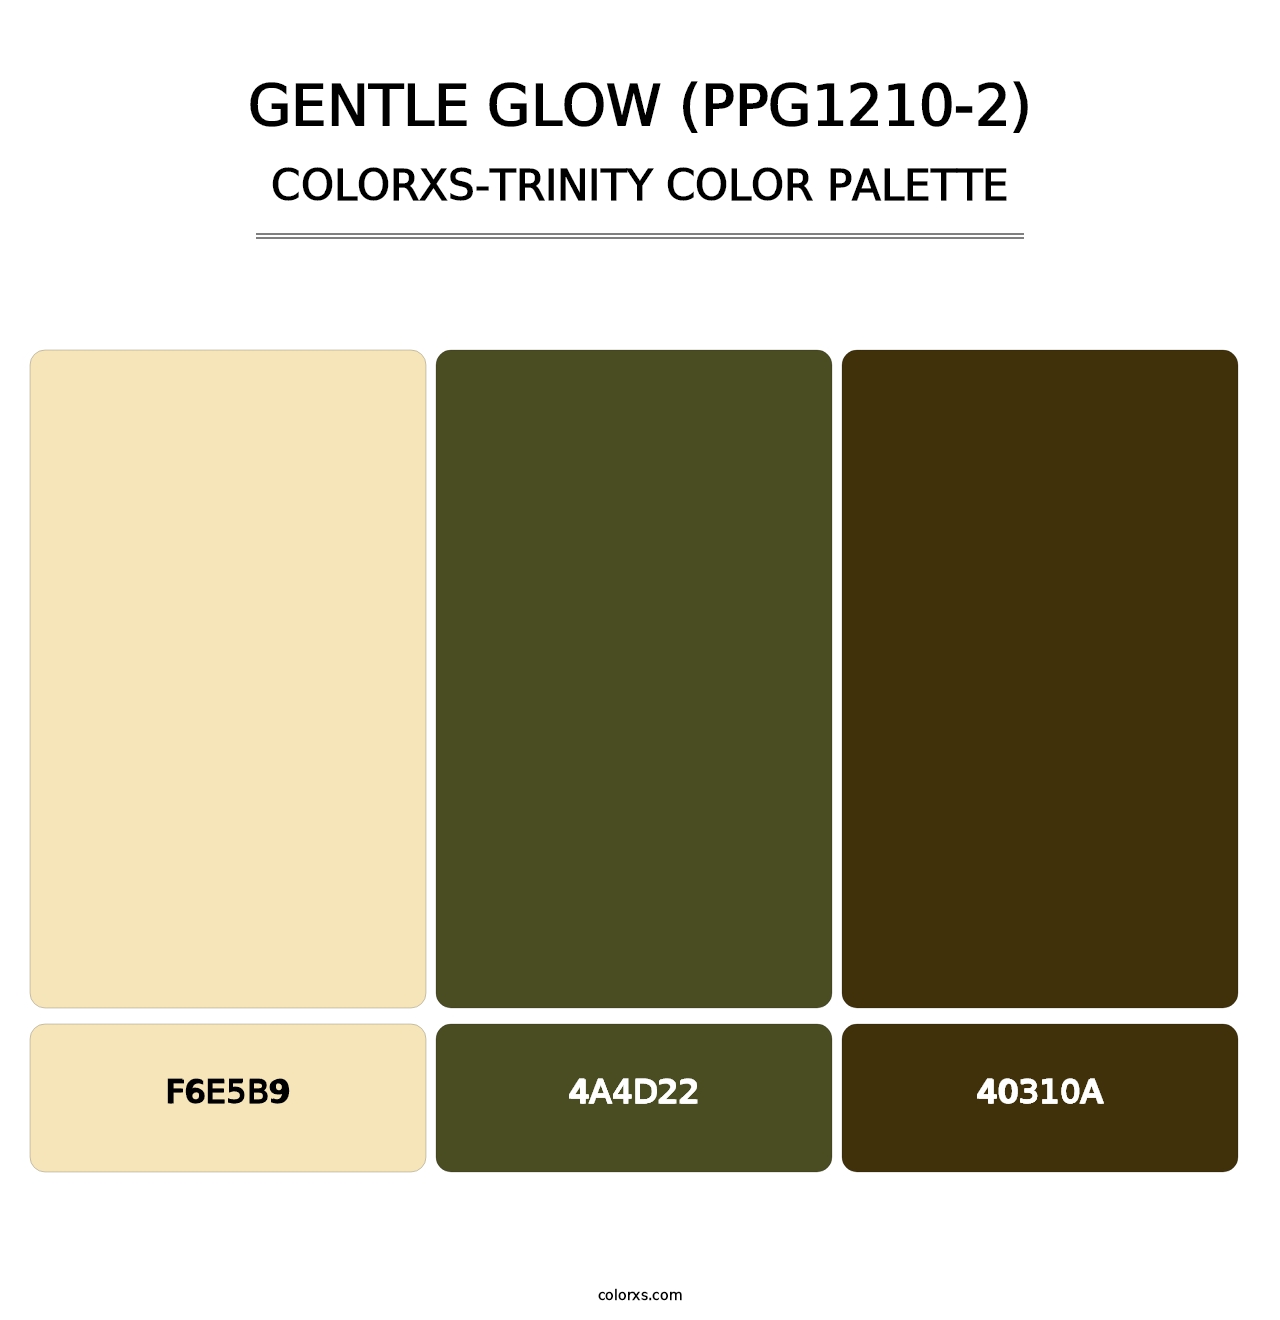 Gentle Glow (PPG1210-2) - Colorxs Trinity Palette